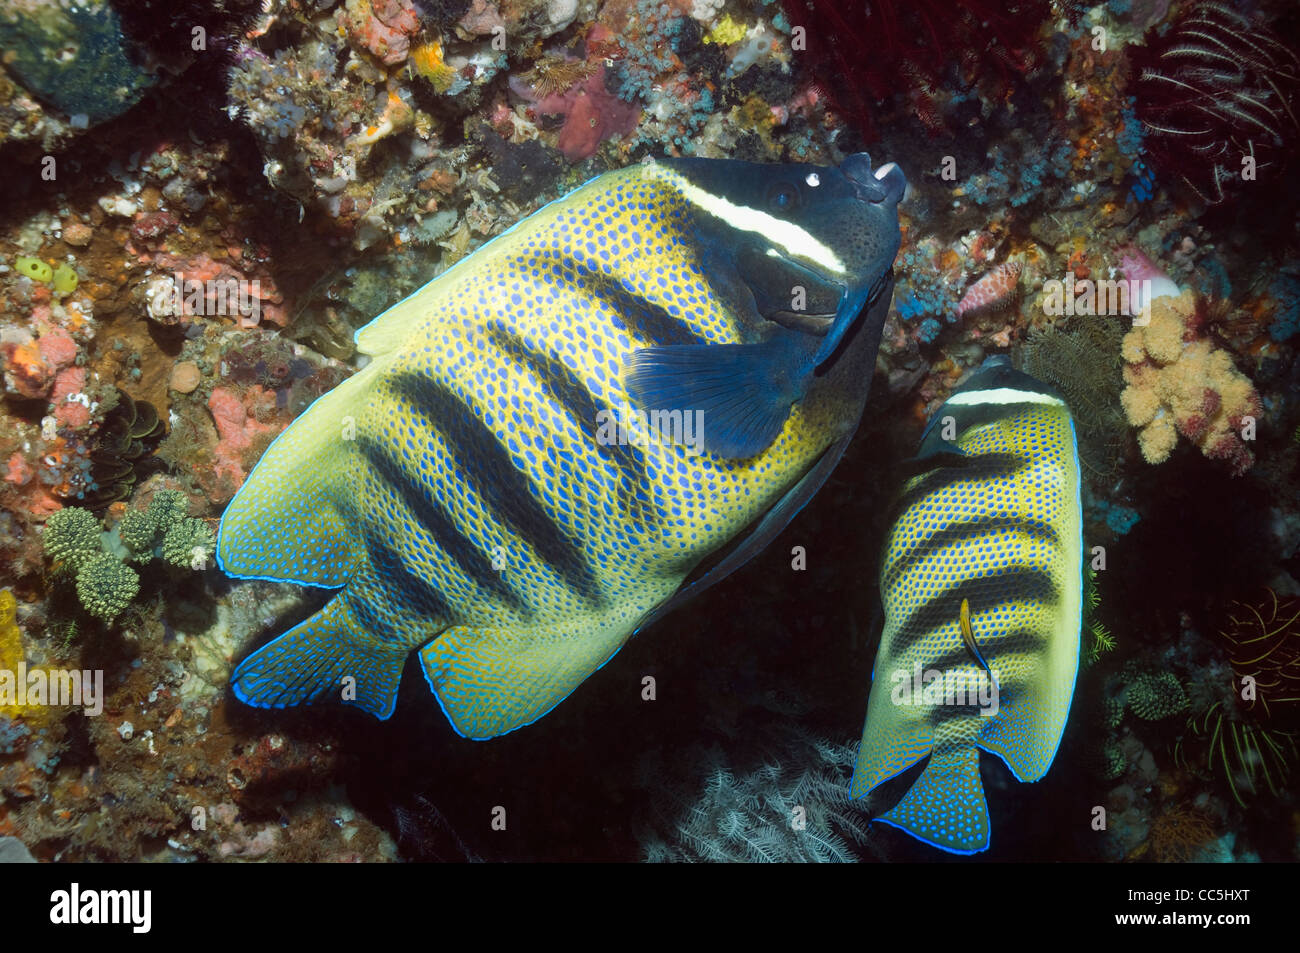 Six-banded angelfish (Pomacanthus sexstriatus) being cleaned by a Bluestreak cleaner wrasses (Labroides dimidiatus). Indonesia. Stock Photo